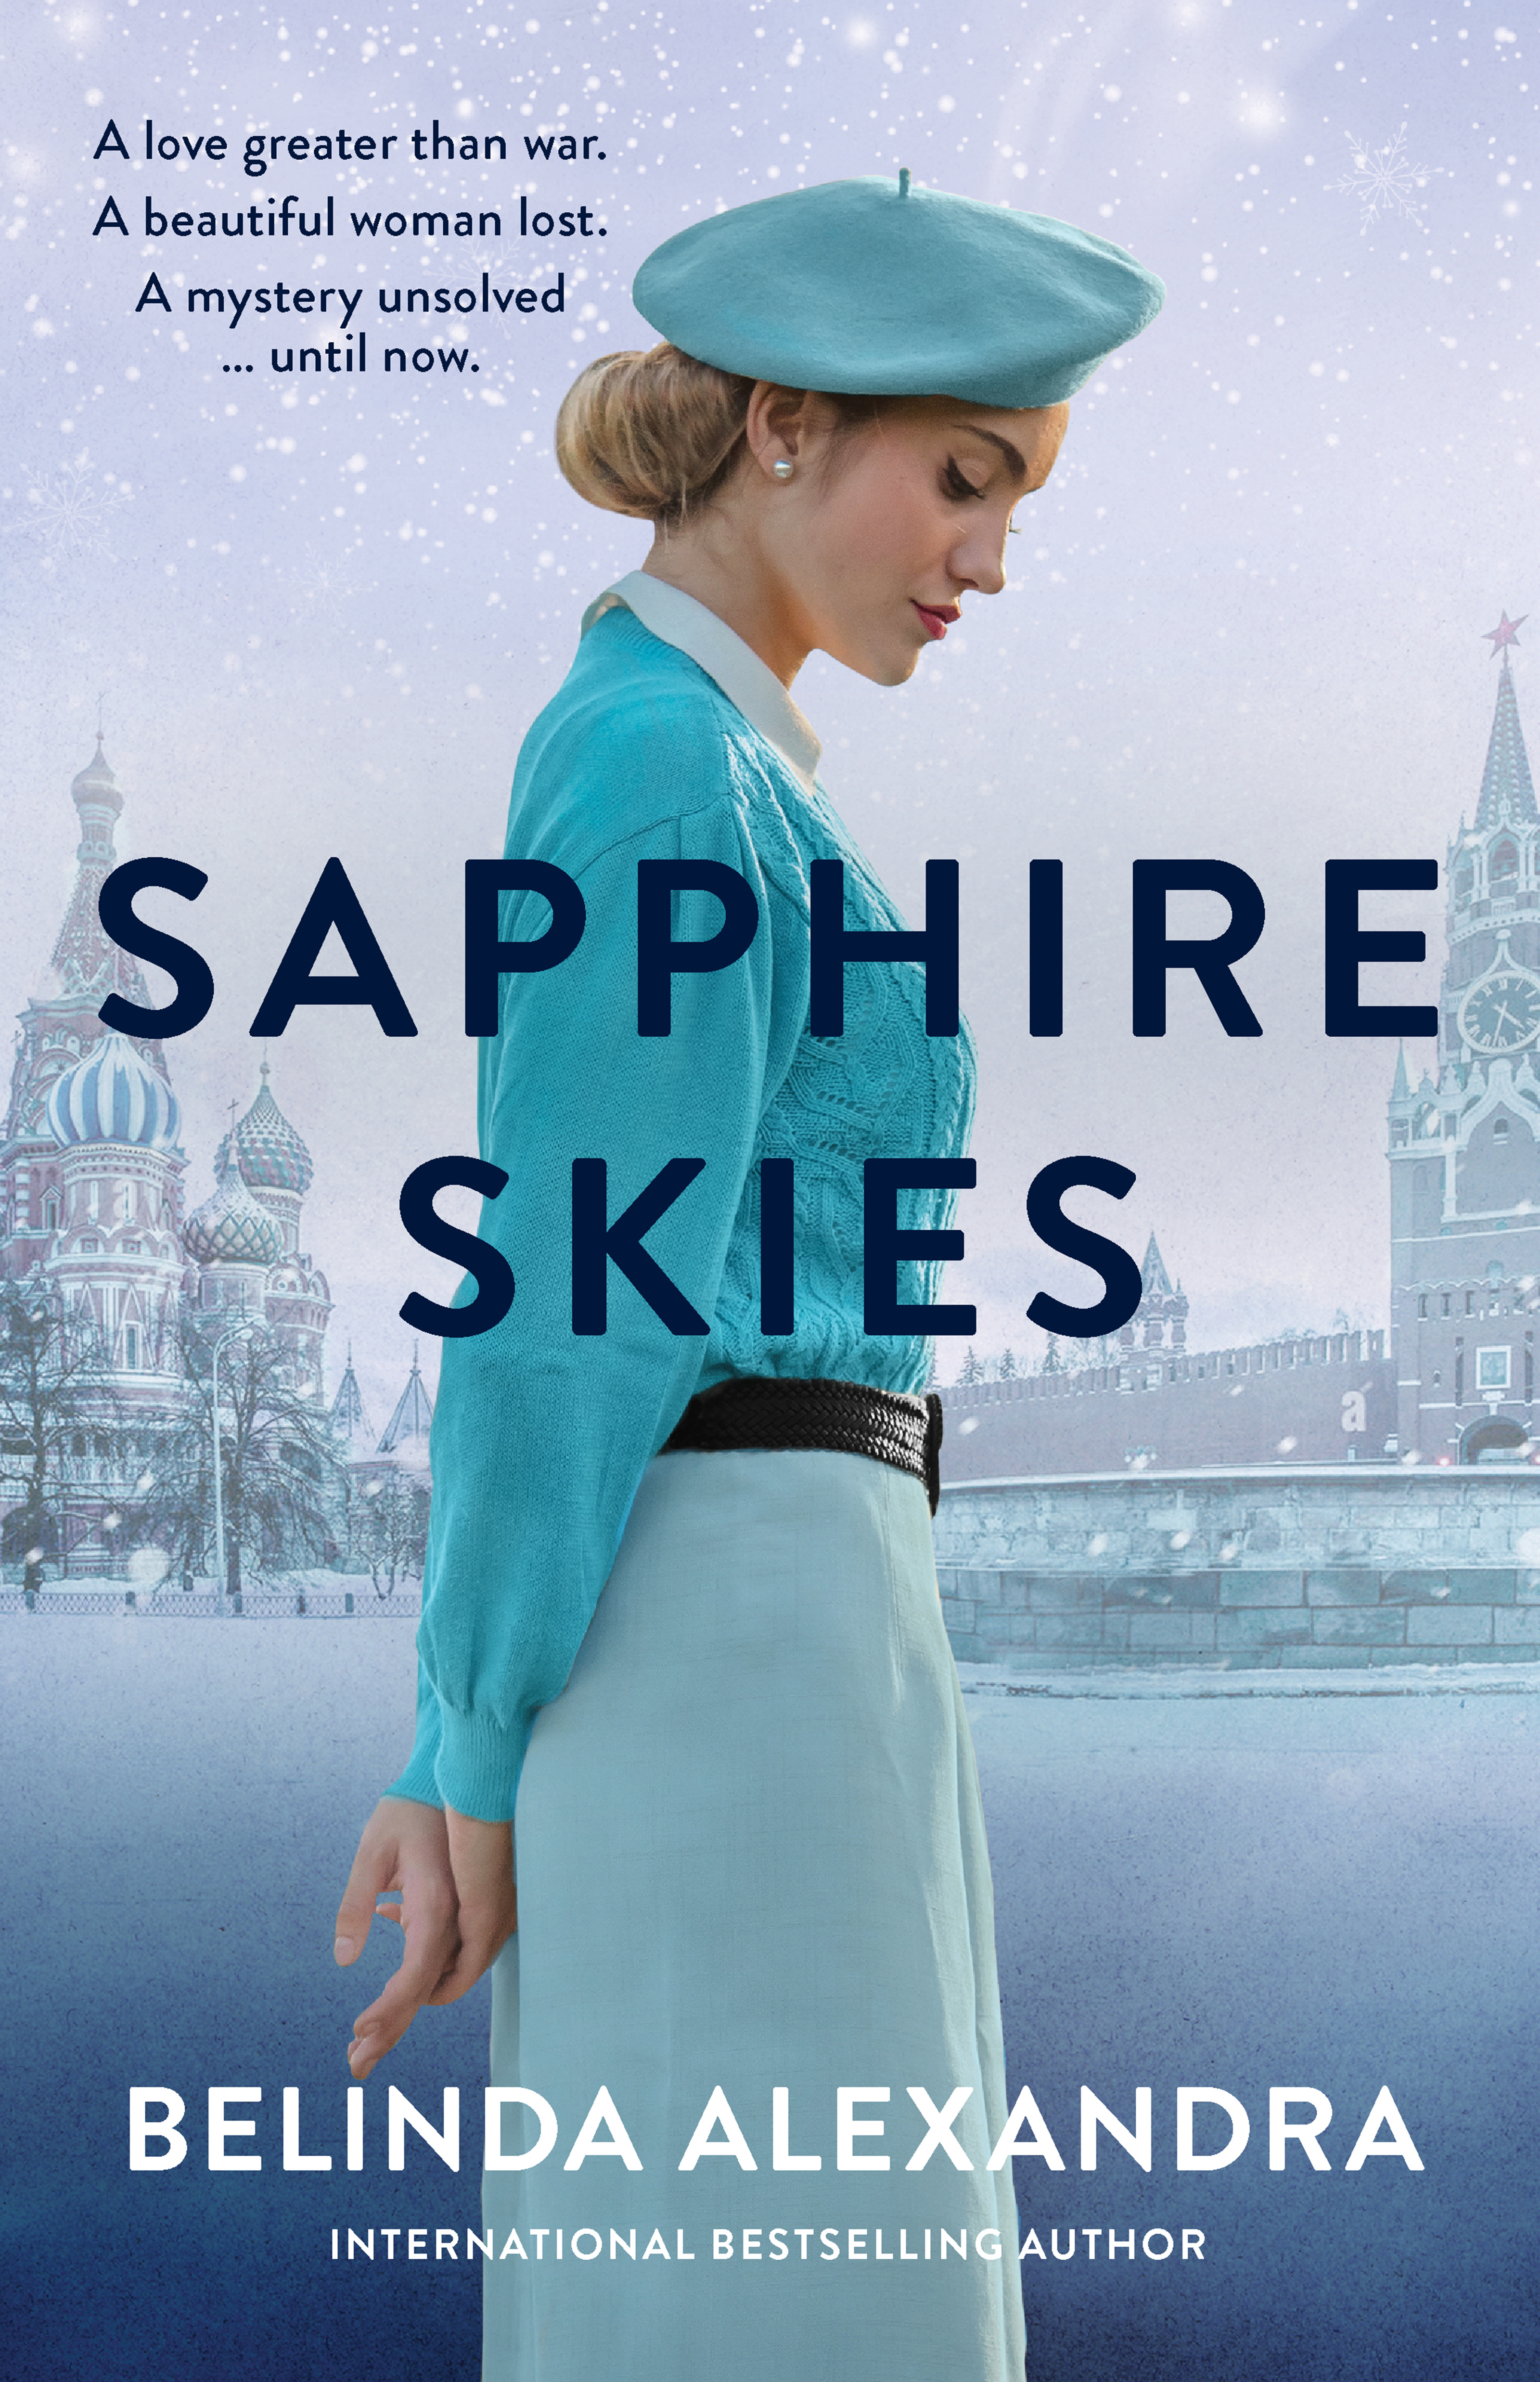 Umschlagbild für Sapphire Skies [electronic resource] : A thrilling love story from the bestselling historical fiction author of THE MYSTERY WOMAN, for readers of Mandy Robotham, Fiona McIntosh and Kirsty Manning